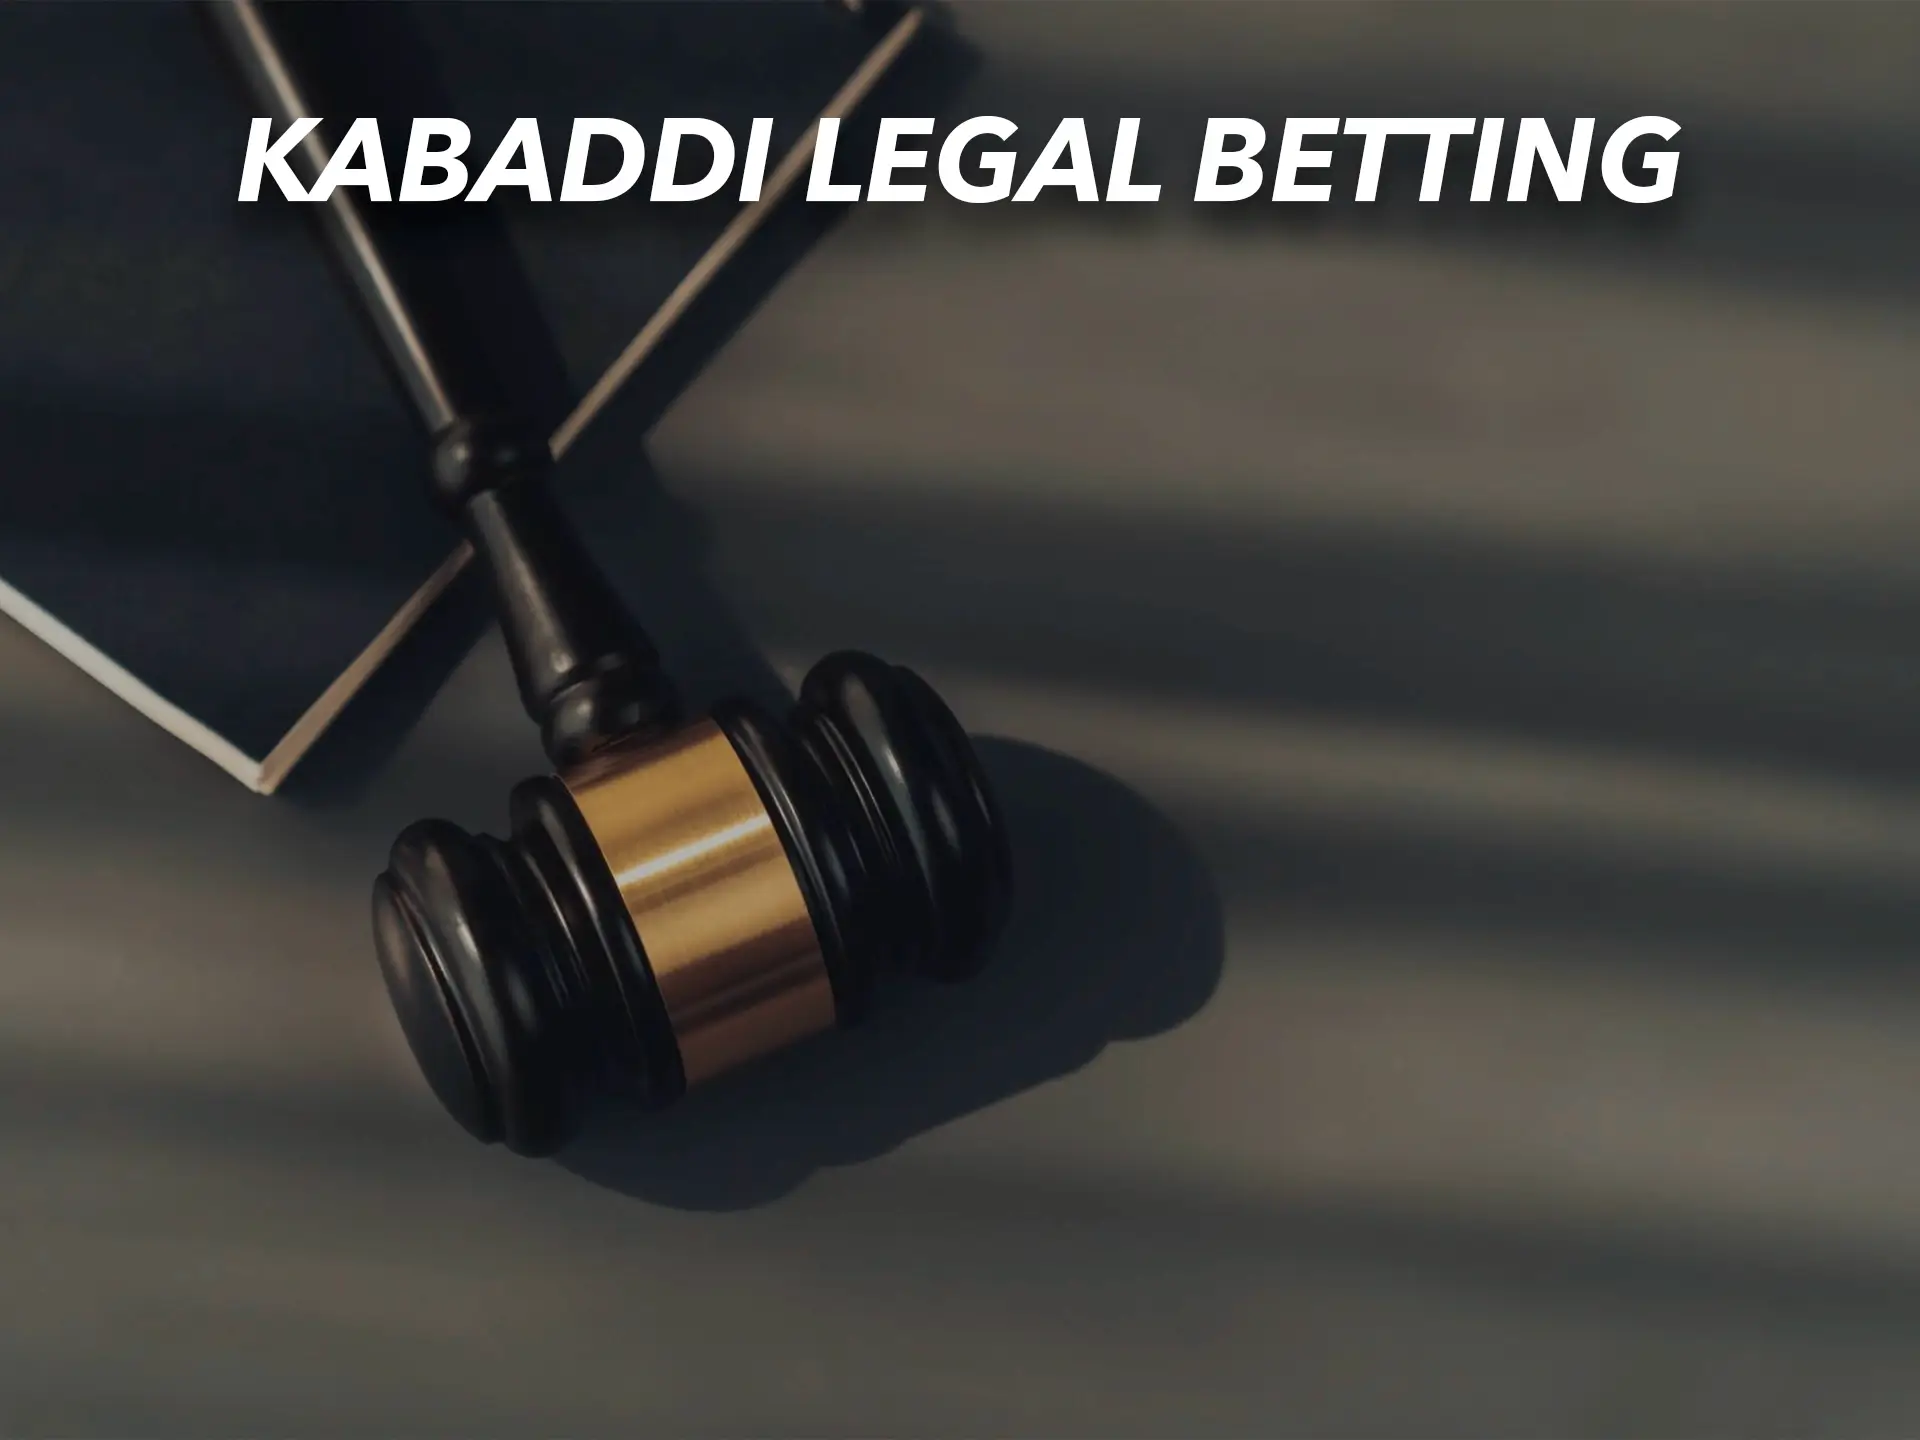 Kabaddi is a recognised sporting discipline in India with its own rules and licences.